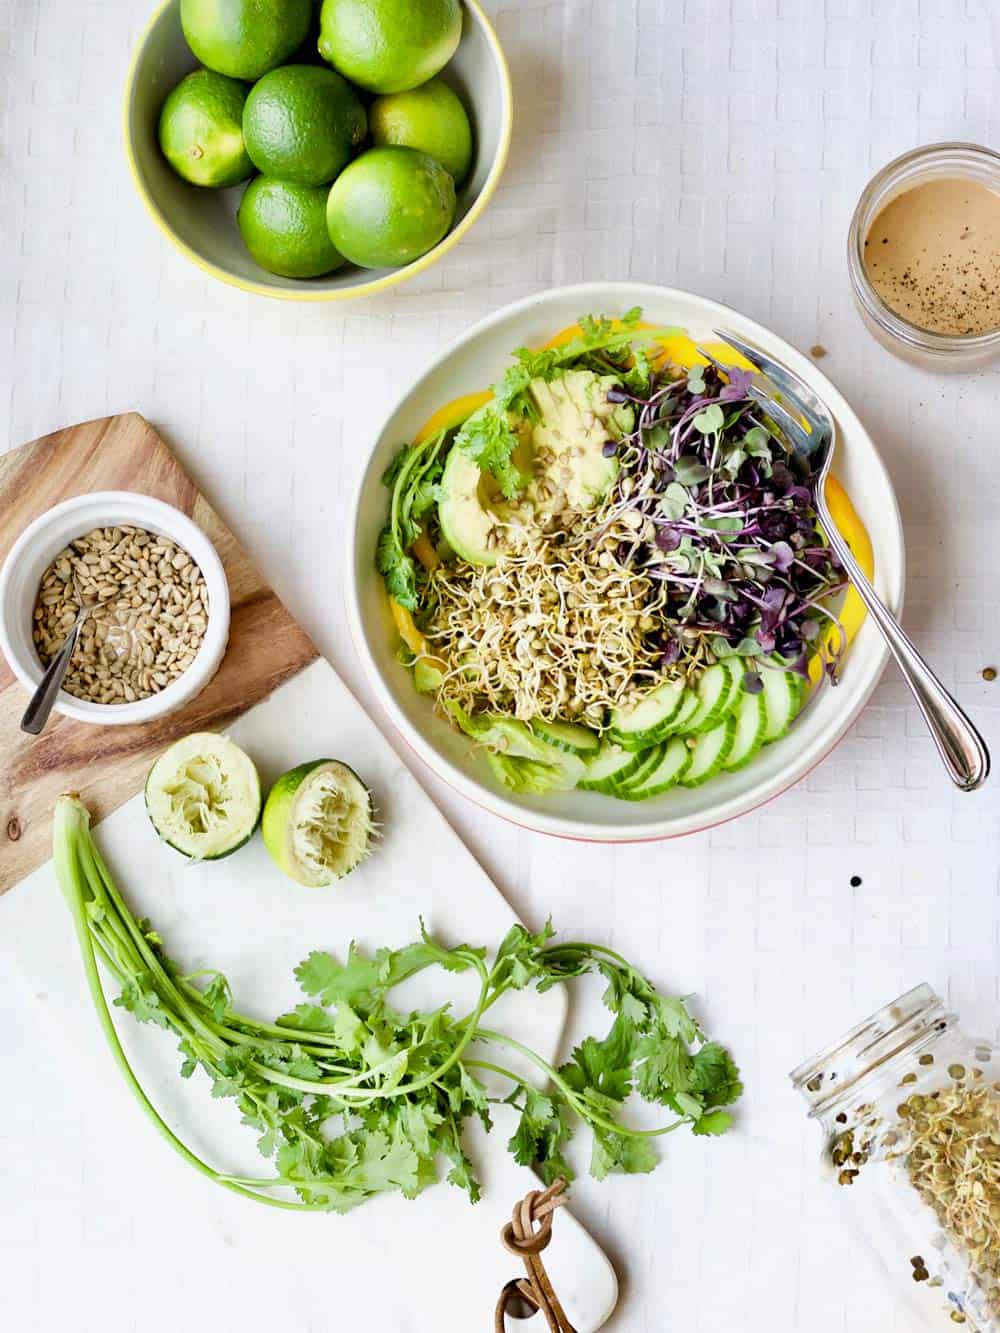 Sprouted salad with tahini lime dressing + 15 Farmers market recipes to make in April! Delicious, vegetarian, (mostly) healthy spring recipes made with fresh, seasonal produce from your local farmers market or CSA bin. Eat local! // Rhubarbarians